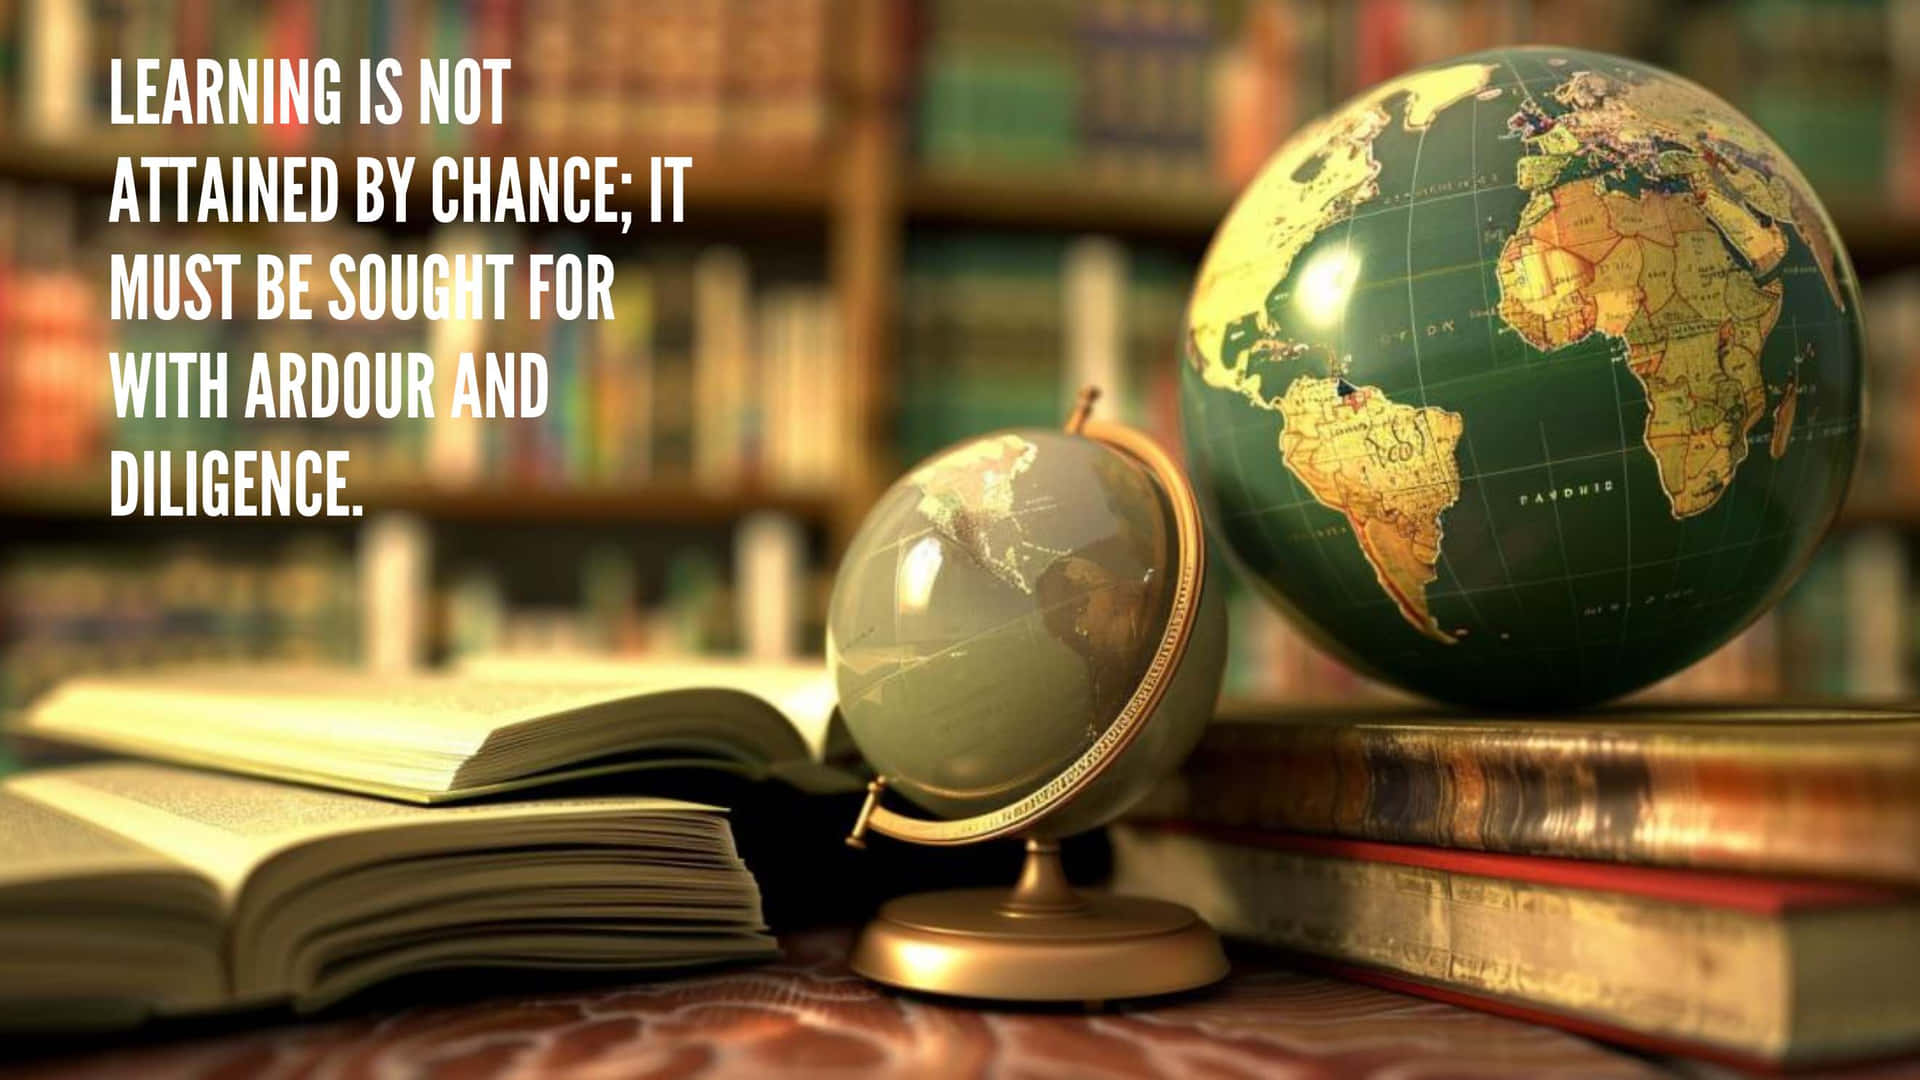 Education Diligence Quote Globesand Books Wallpaper